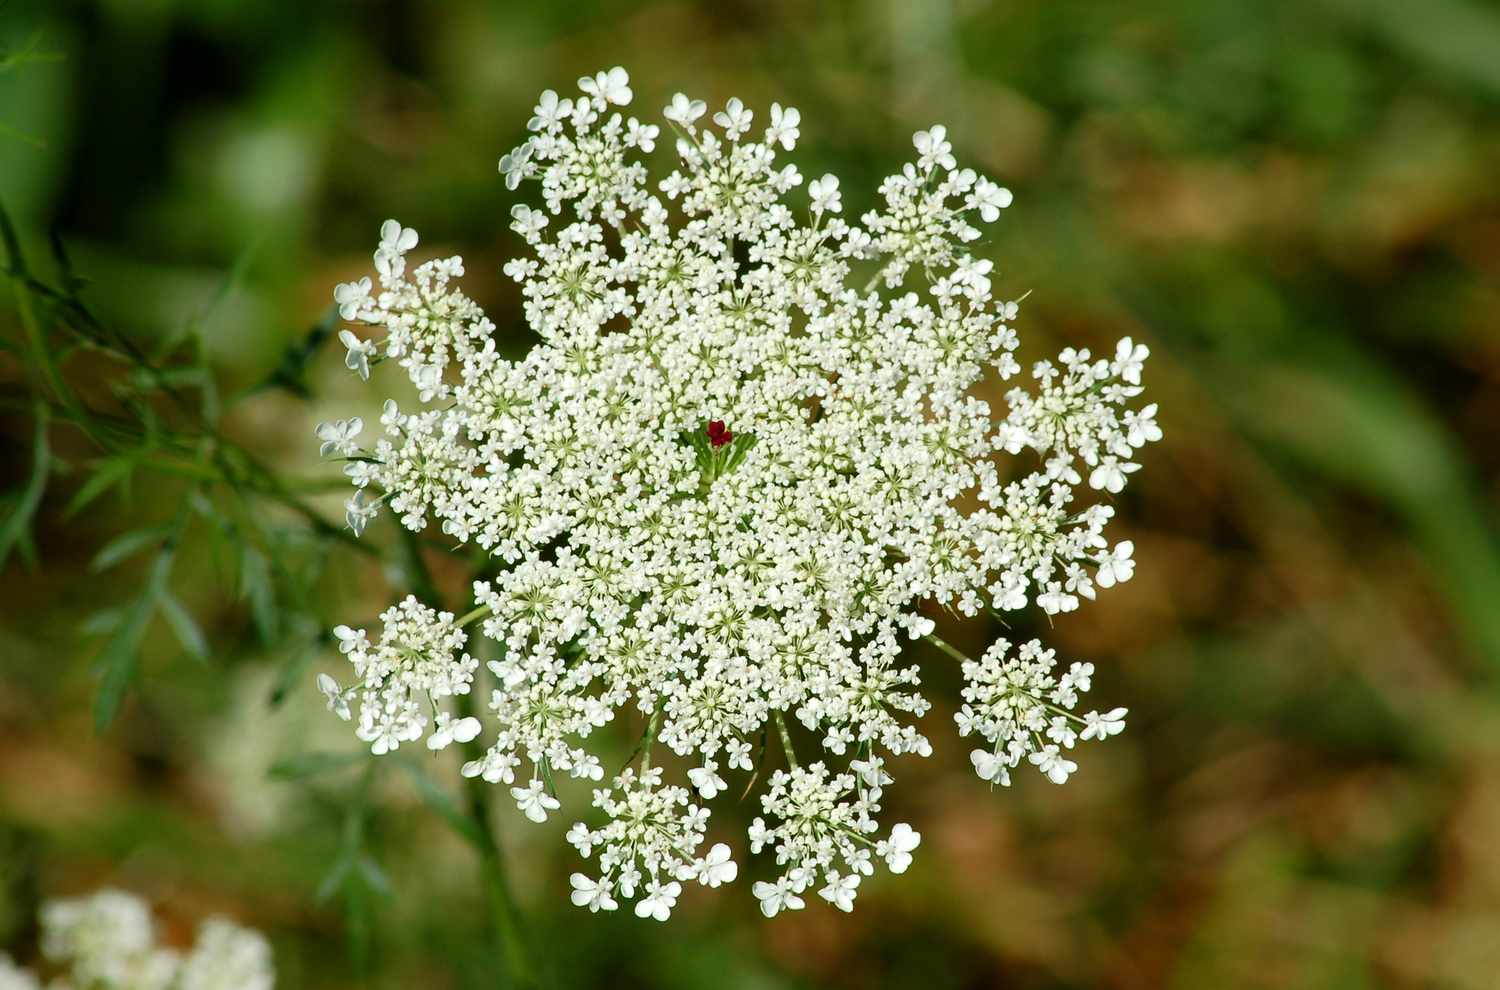 Queen Anne's lace flower with a fairy seat.